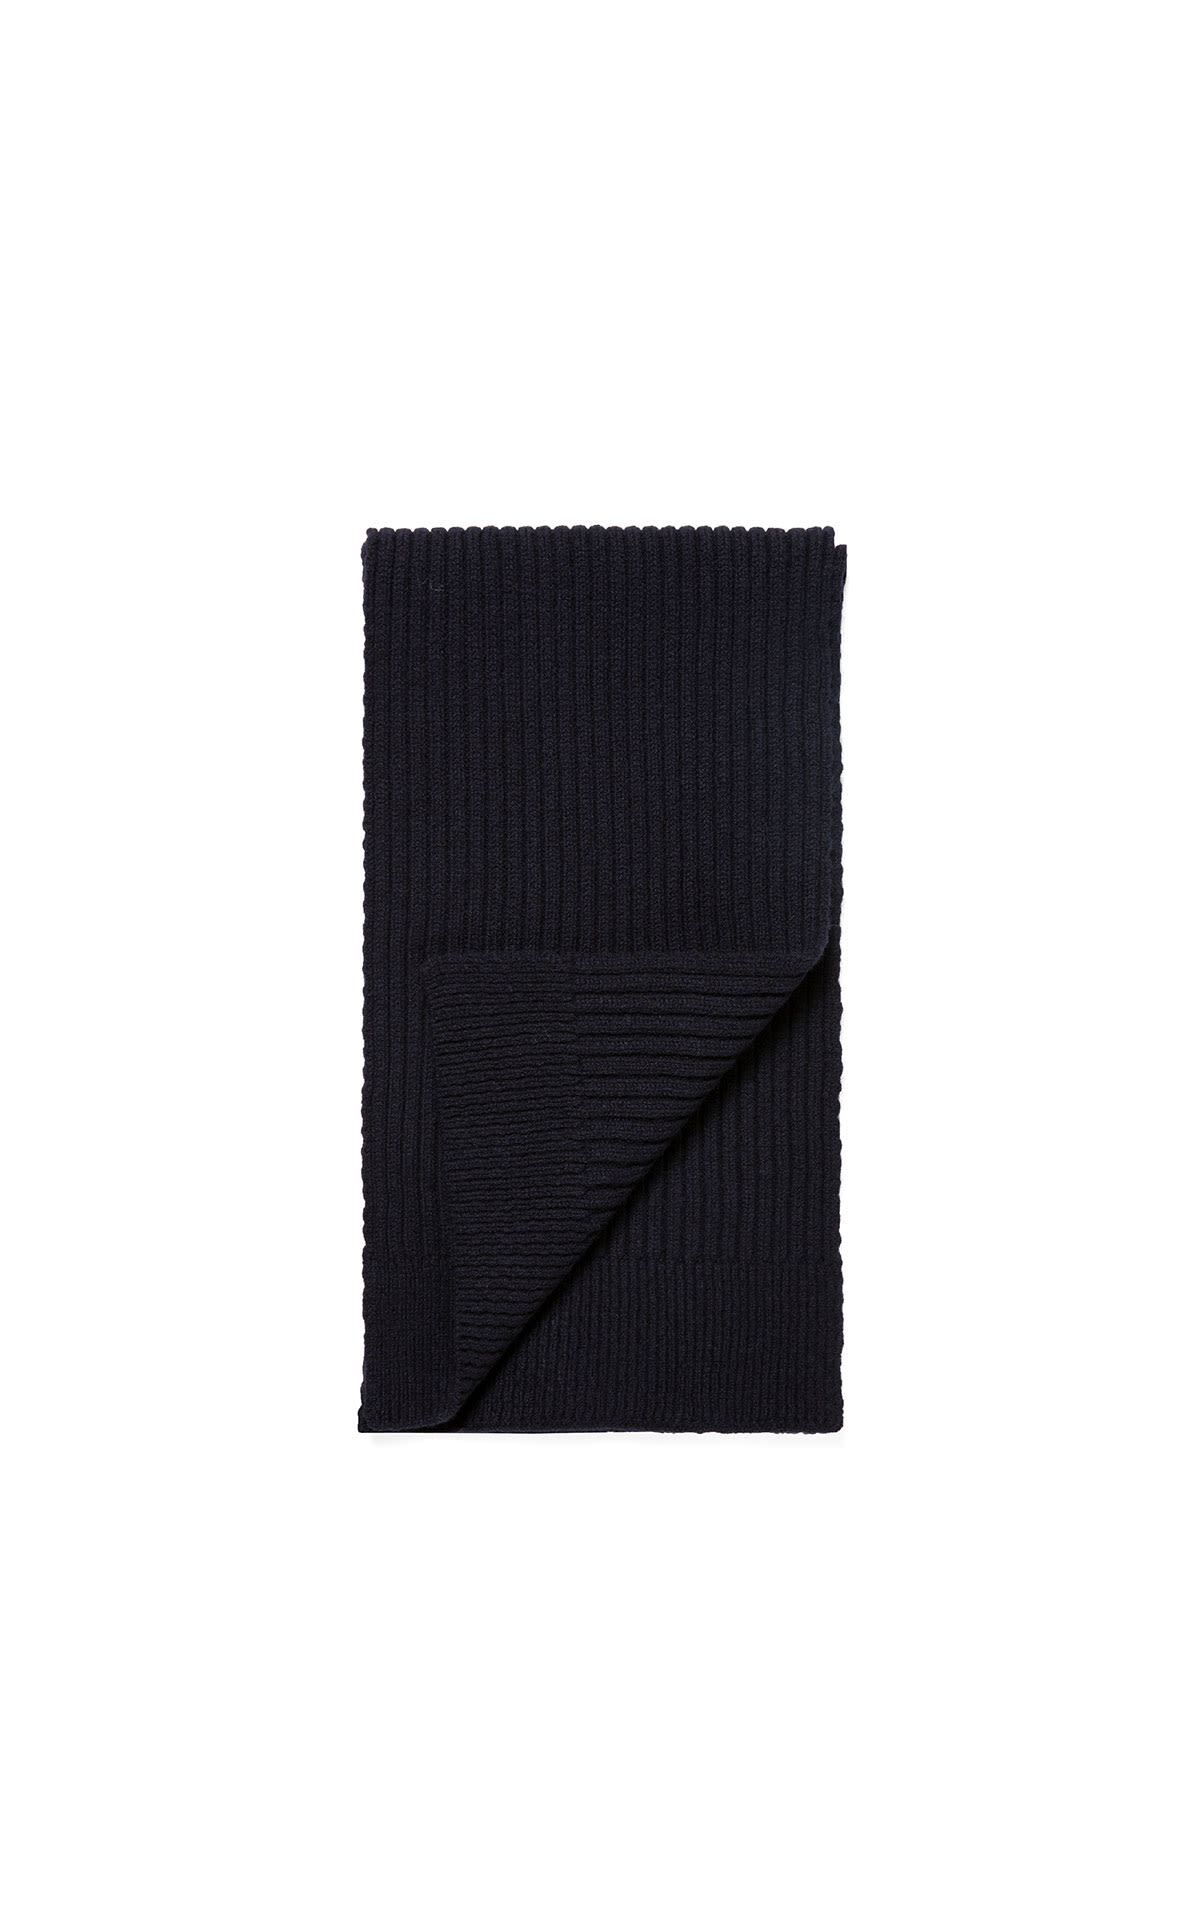 Sunspel Lambswool rib scarf in navy  from Bicester Village